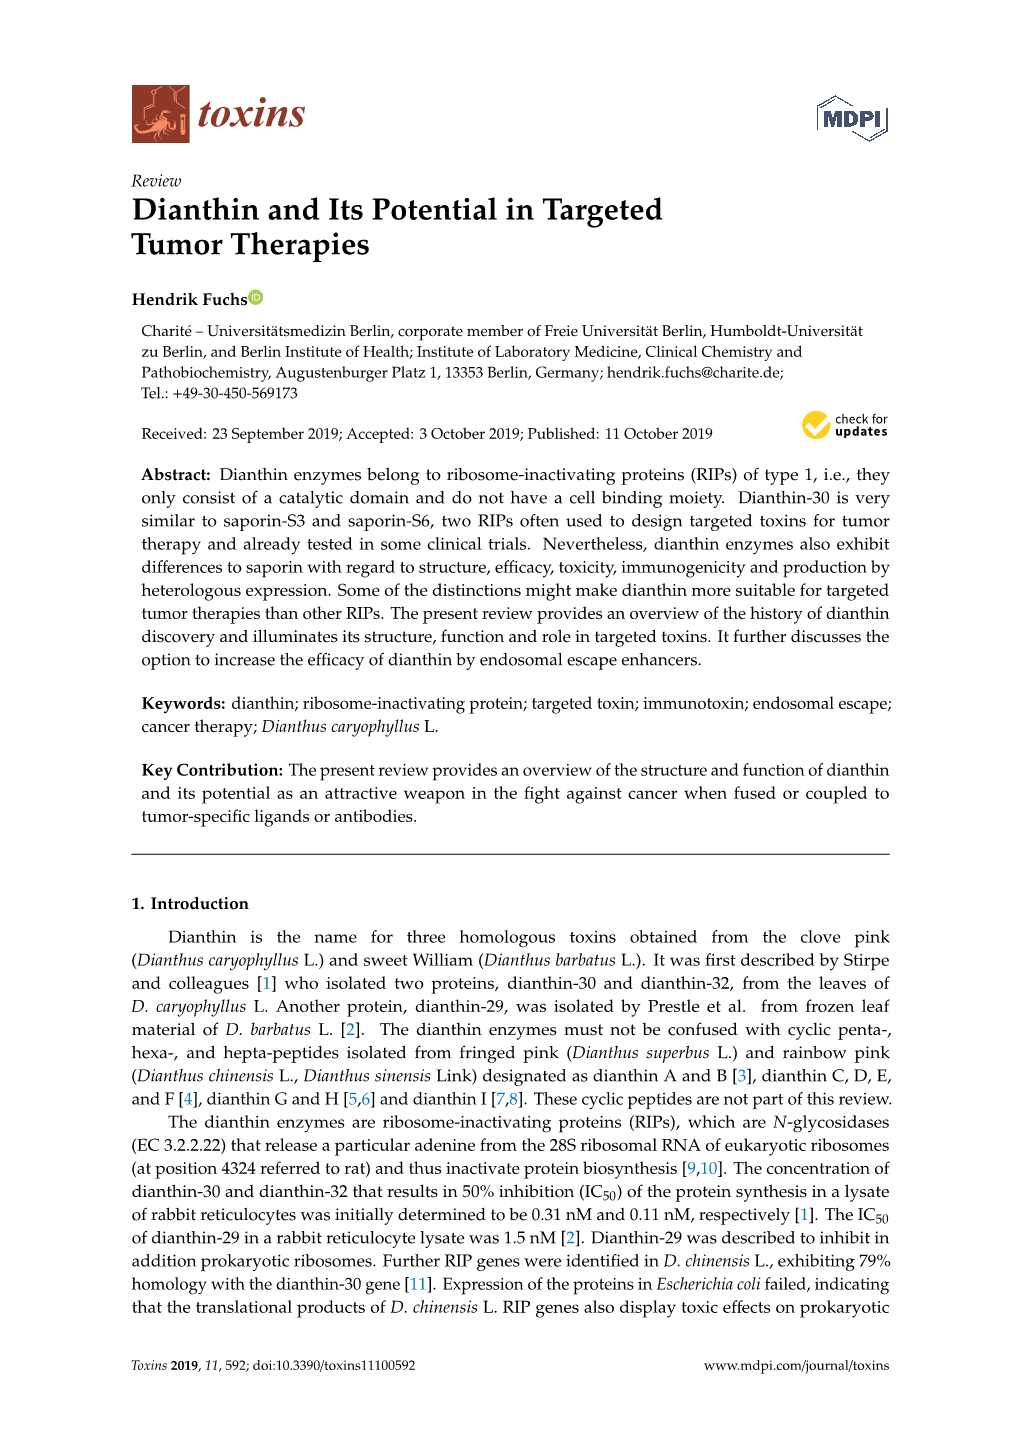 Dianthin and Its Potential in Targeted Tumor Therapies